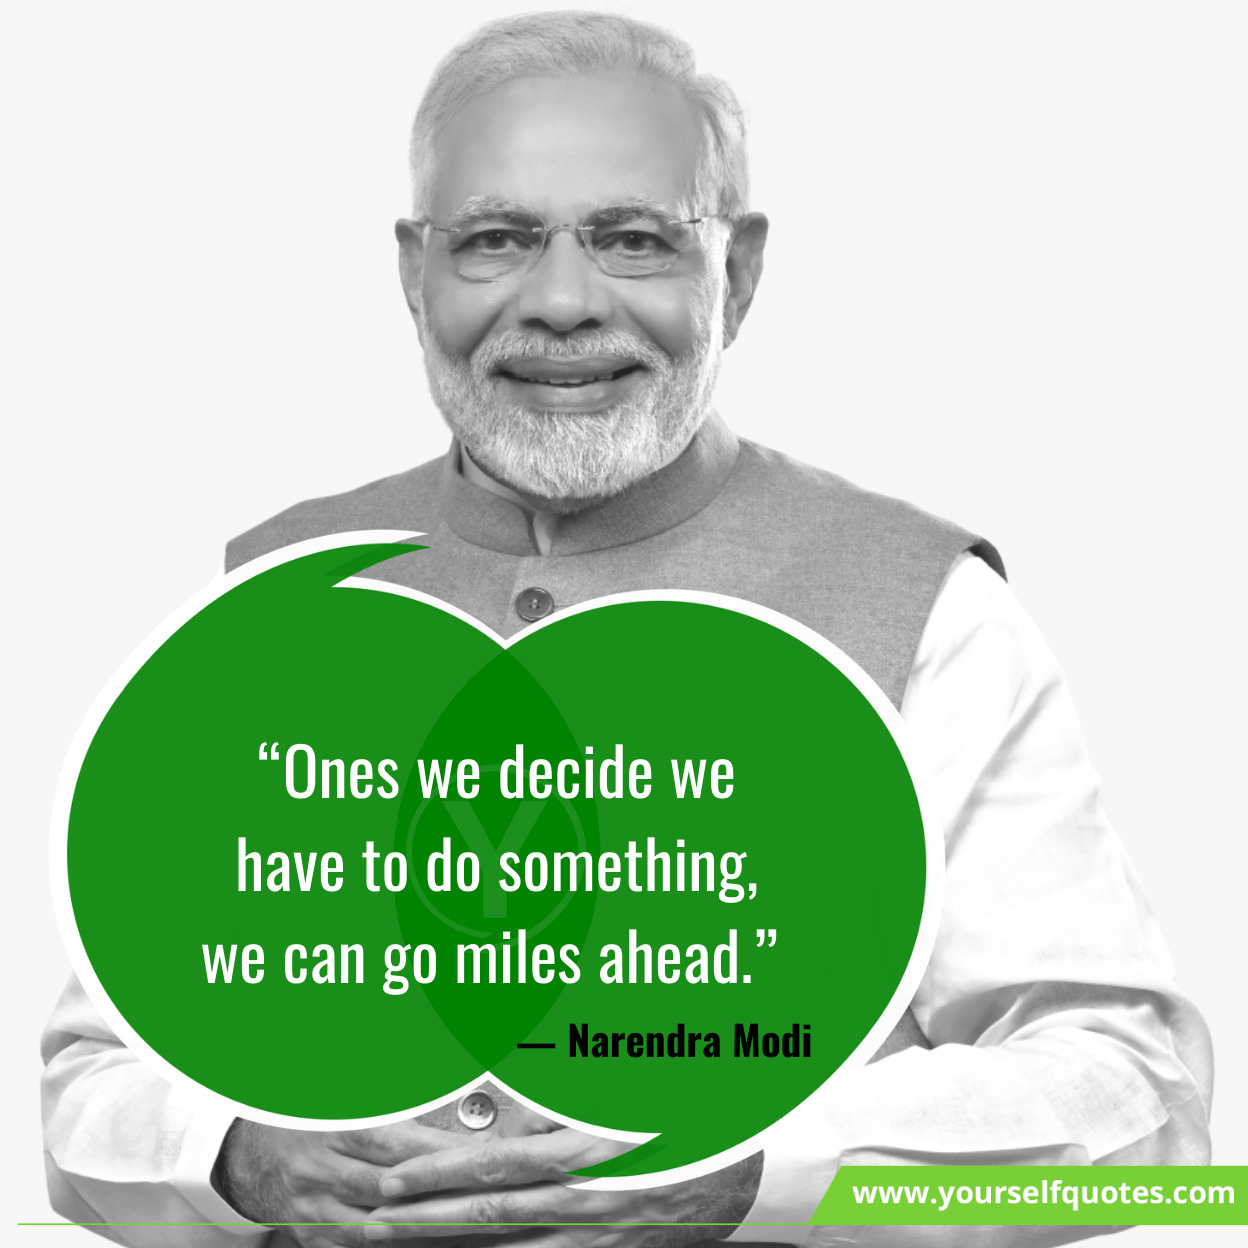 2022] Narendra Modi Quotes Words To Motivate You To Believe